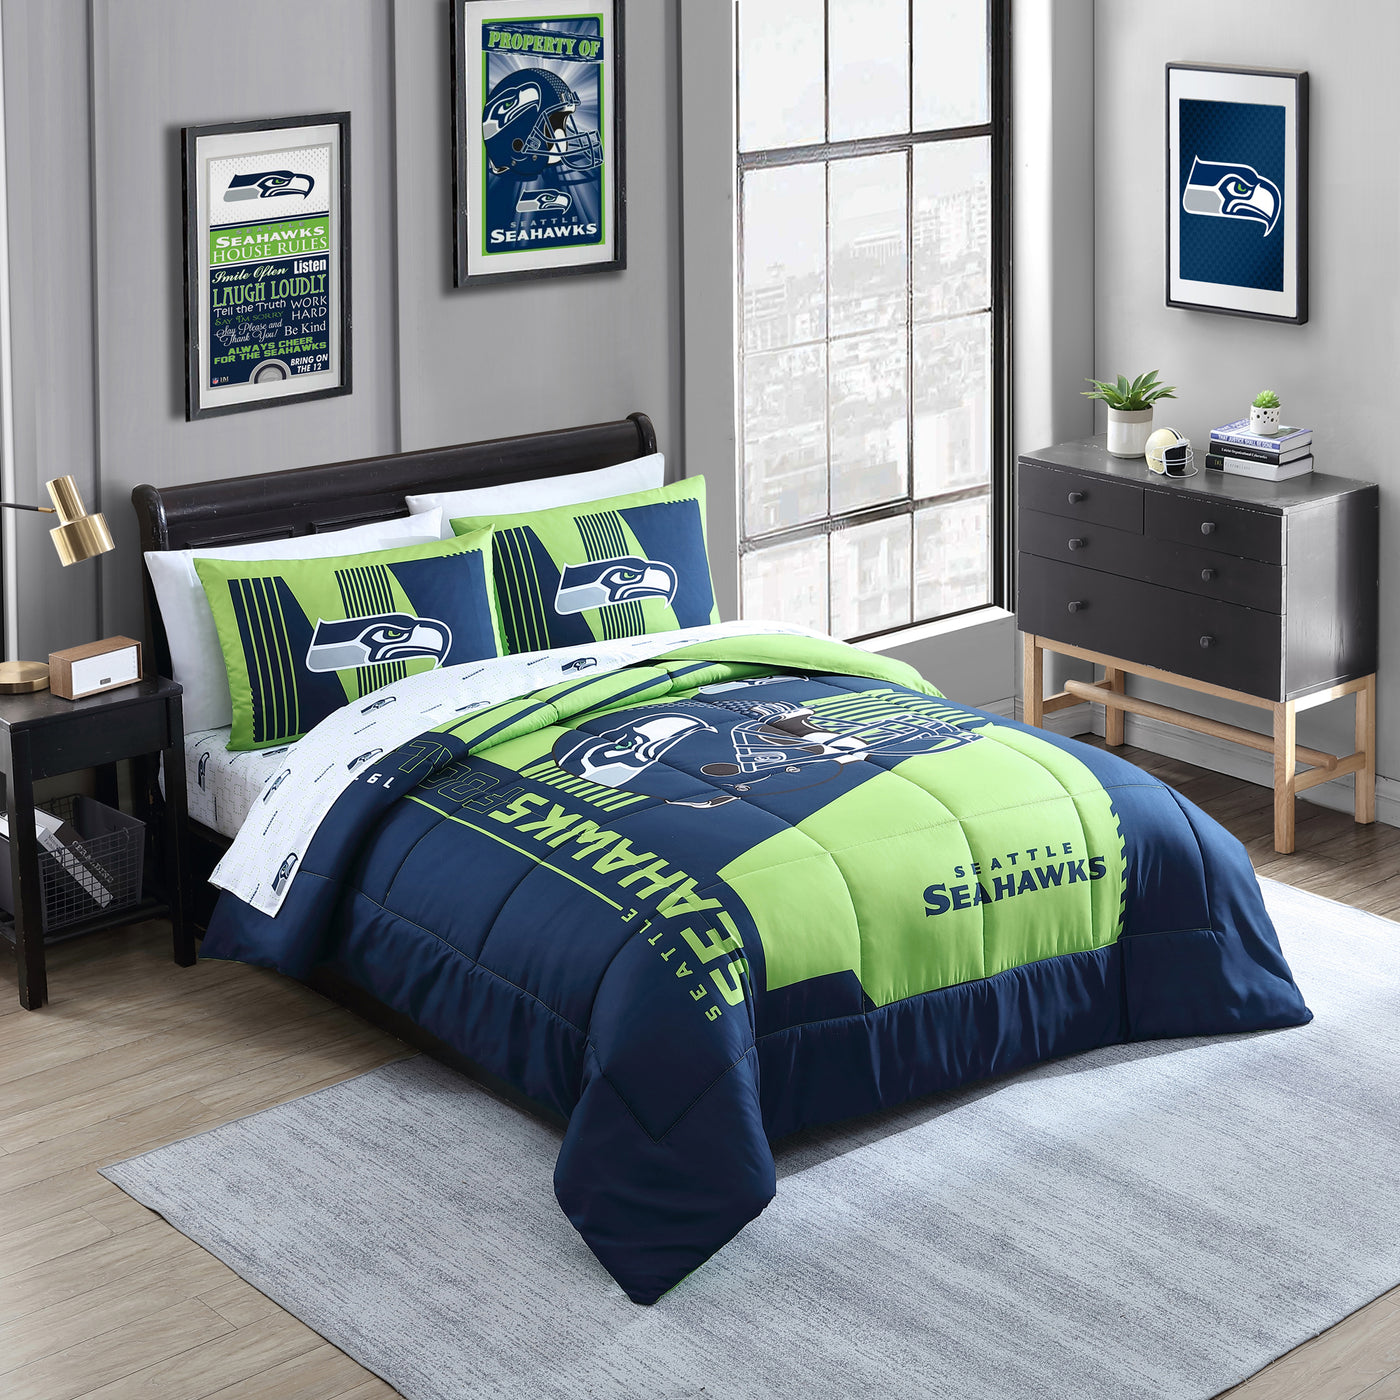 Seattle Seahawks Status Bed In A Bag Queen